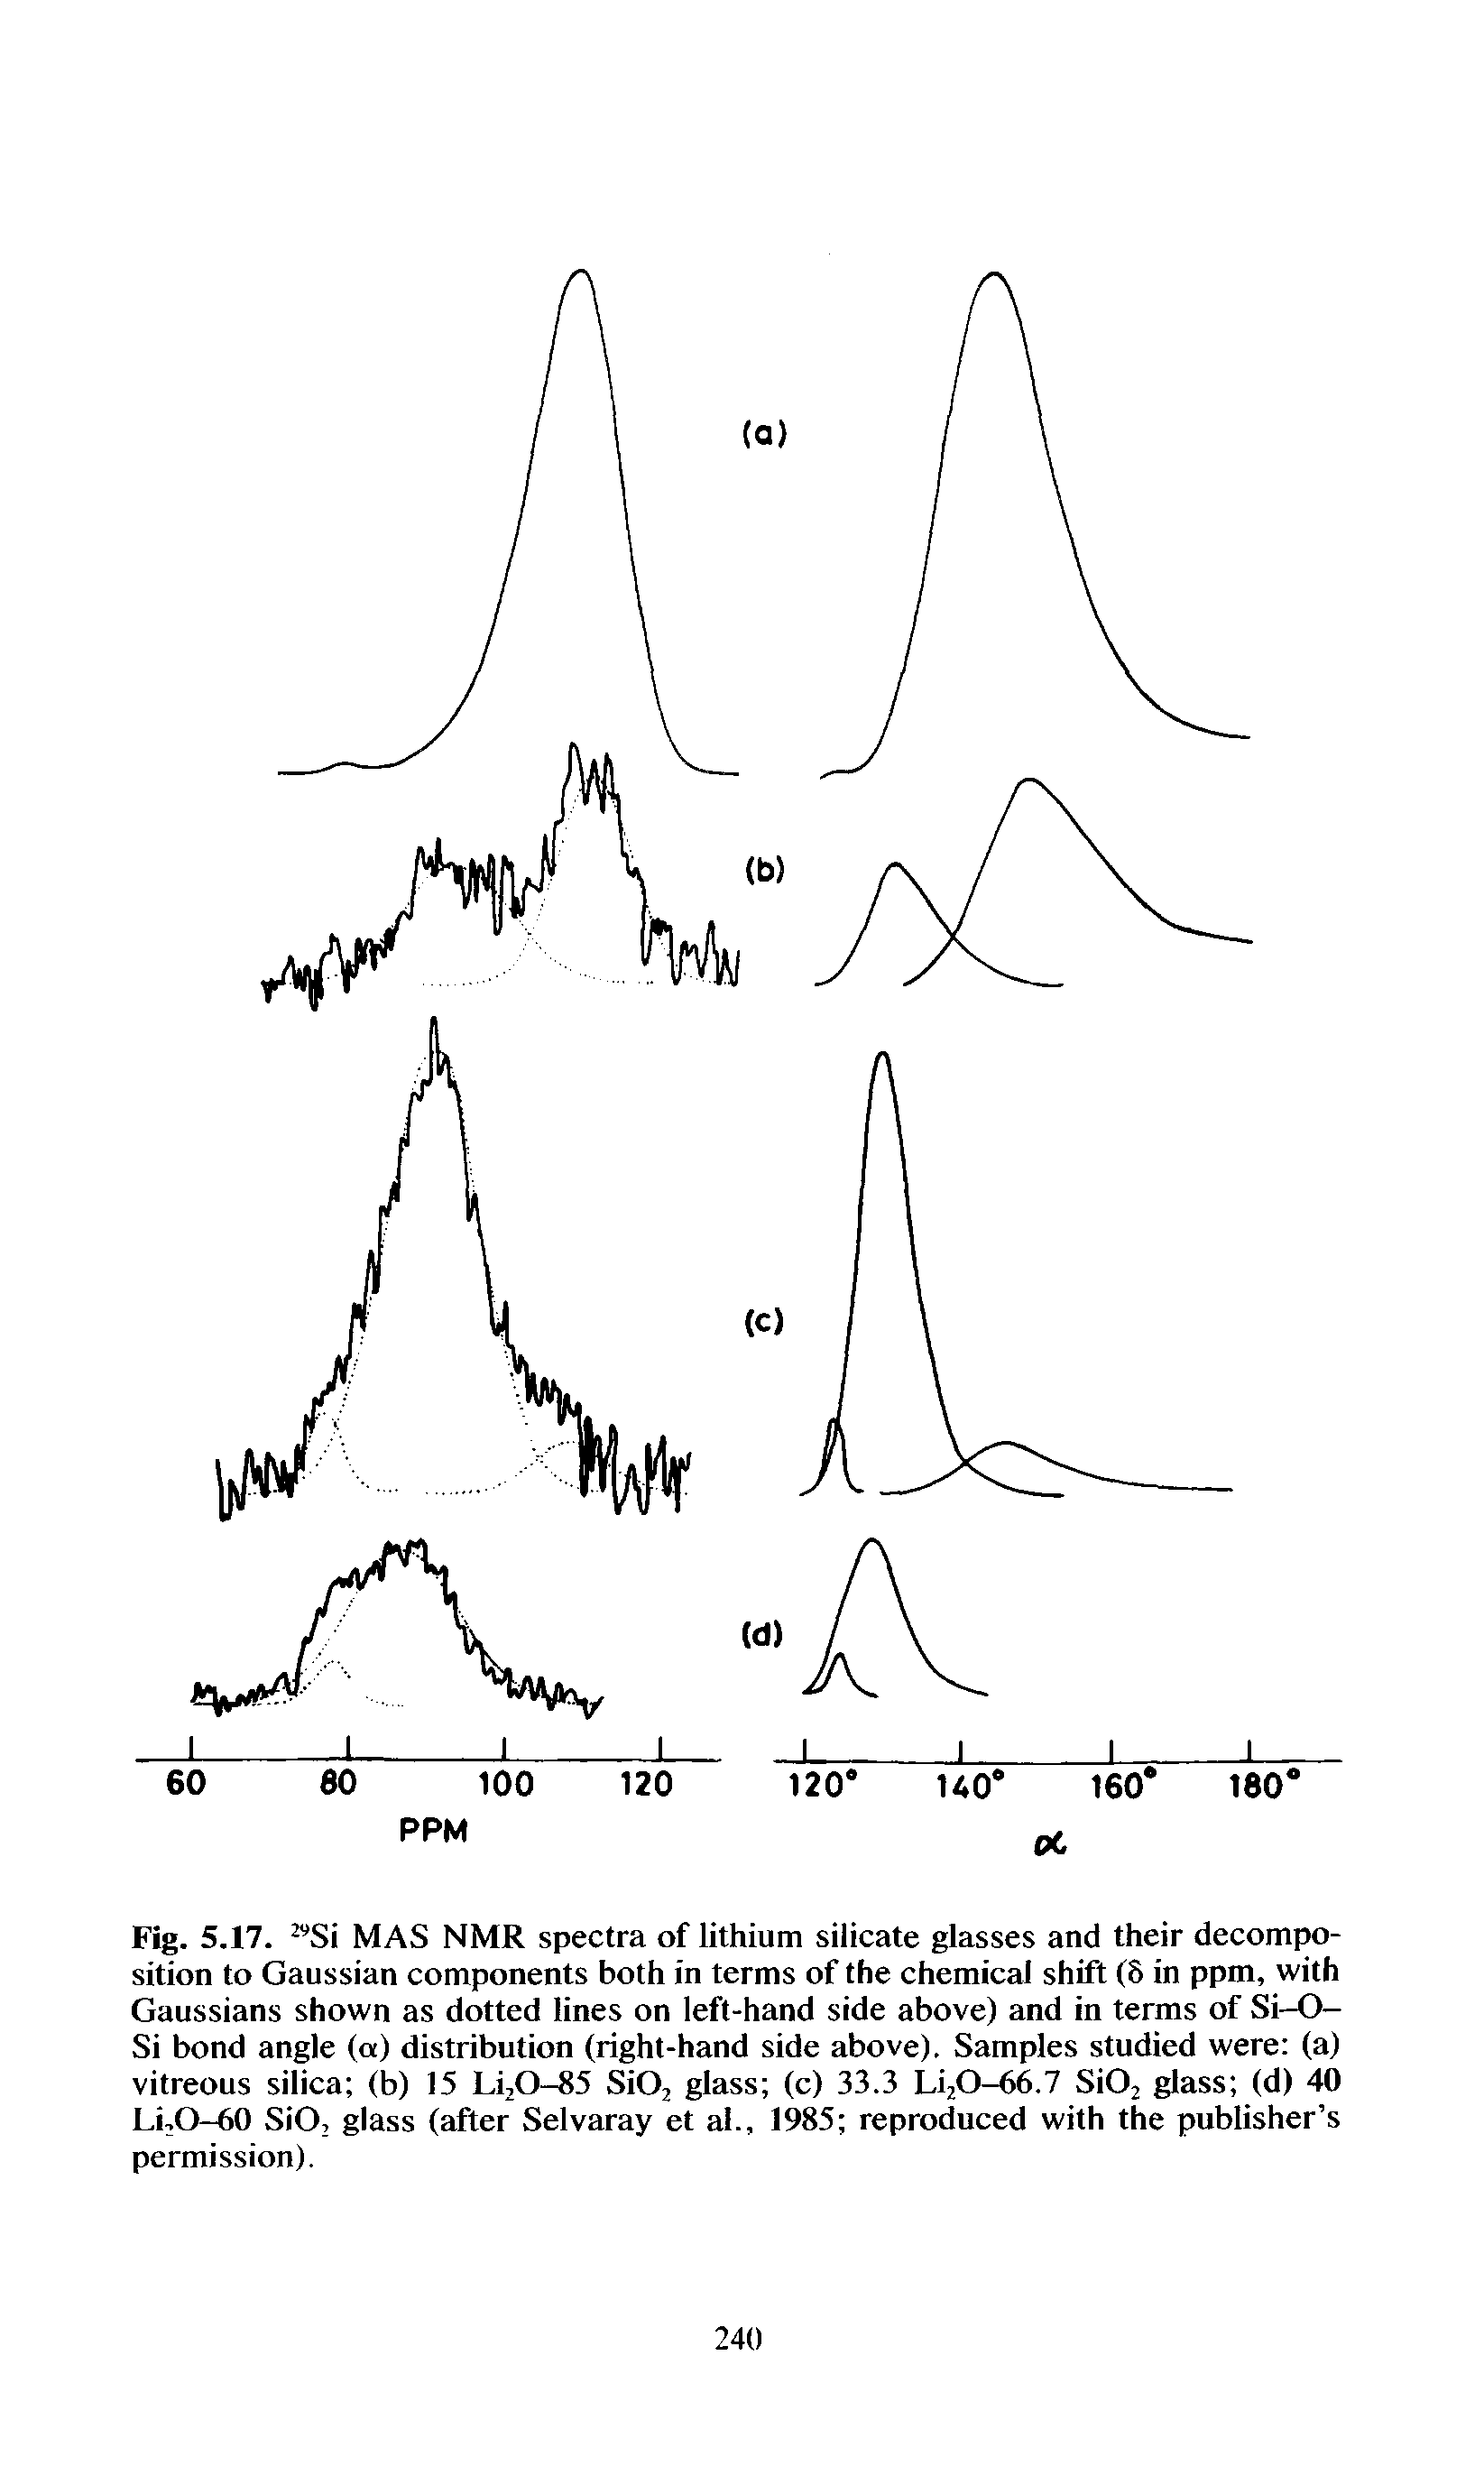 Fig. 5.17. Si MAS NMR spectra of lithium silicate glasses and their decomposition to Gaussian components both in terms of the chemical shift (8 in ppm, with Gaussians shown as dotted lines on left-hand side above) and in terms of Si-O-Si bond angle (a) distribution (right-hand side above). Samples studied were (a) vitreous silica (b) 15 Li,0-85 SiOj glass (c) 33.3 LijO-bb. SiOj glass (d) 40 Li,O-60 SiO, glass (after Selvaray et al., 1985 reproduced with the publisher s permission).